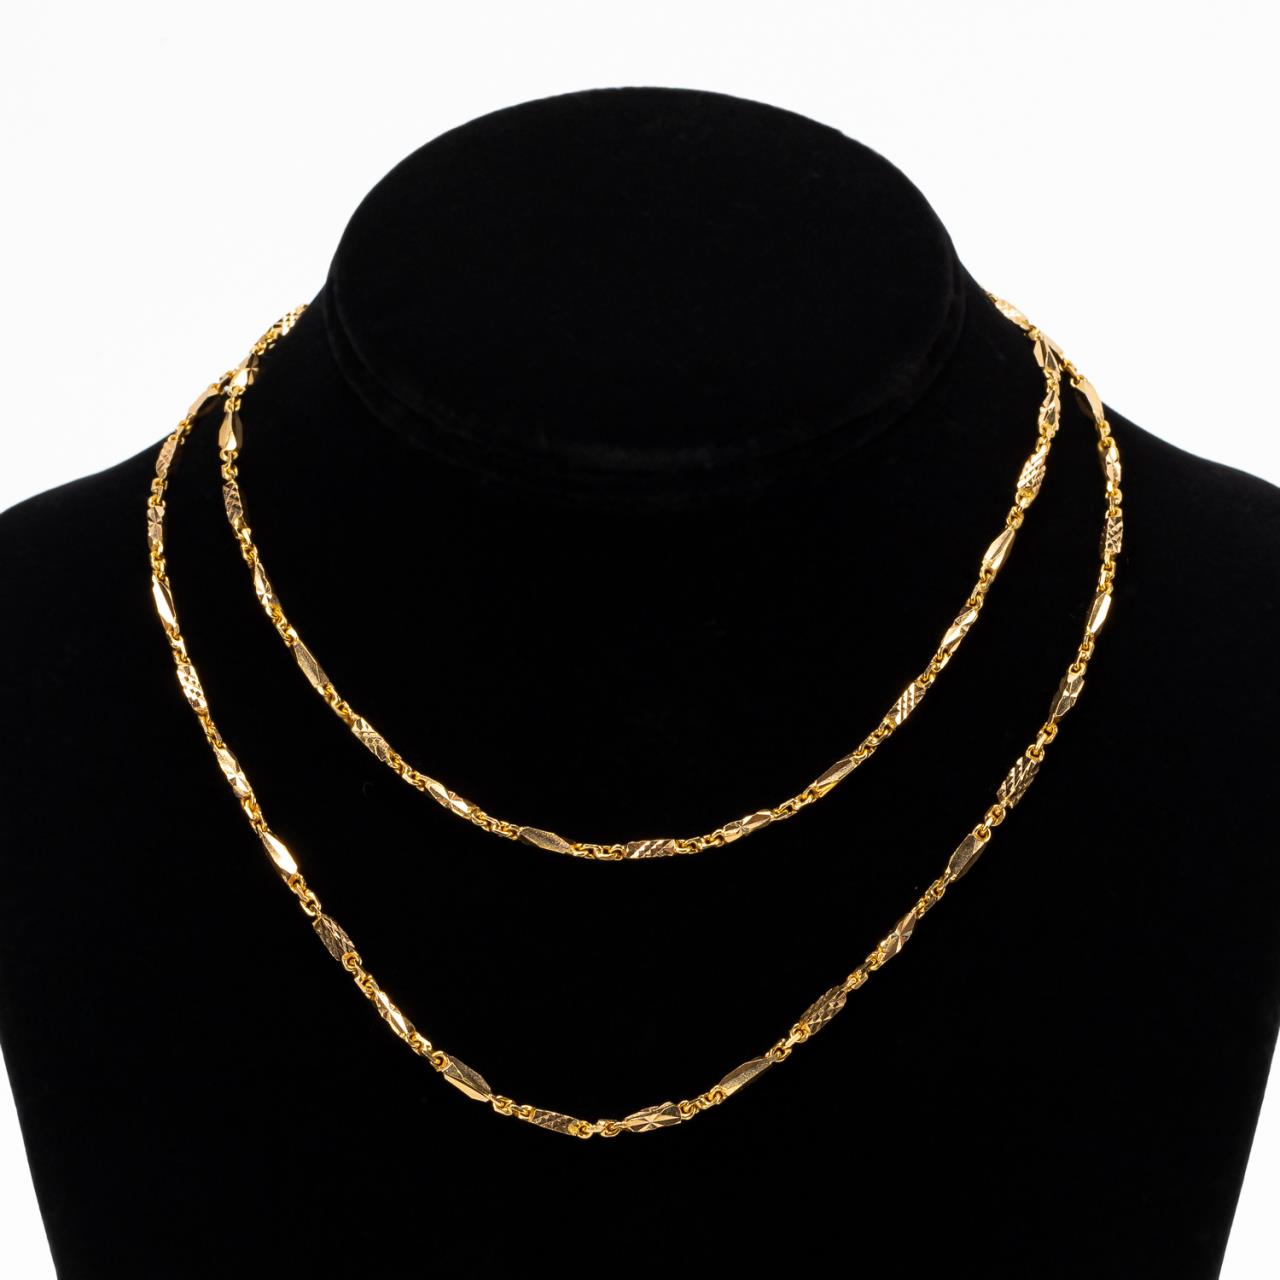 18K YELLOW GOLD 31 LINK BAR CHAIN  35ad16